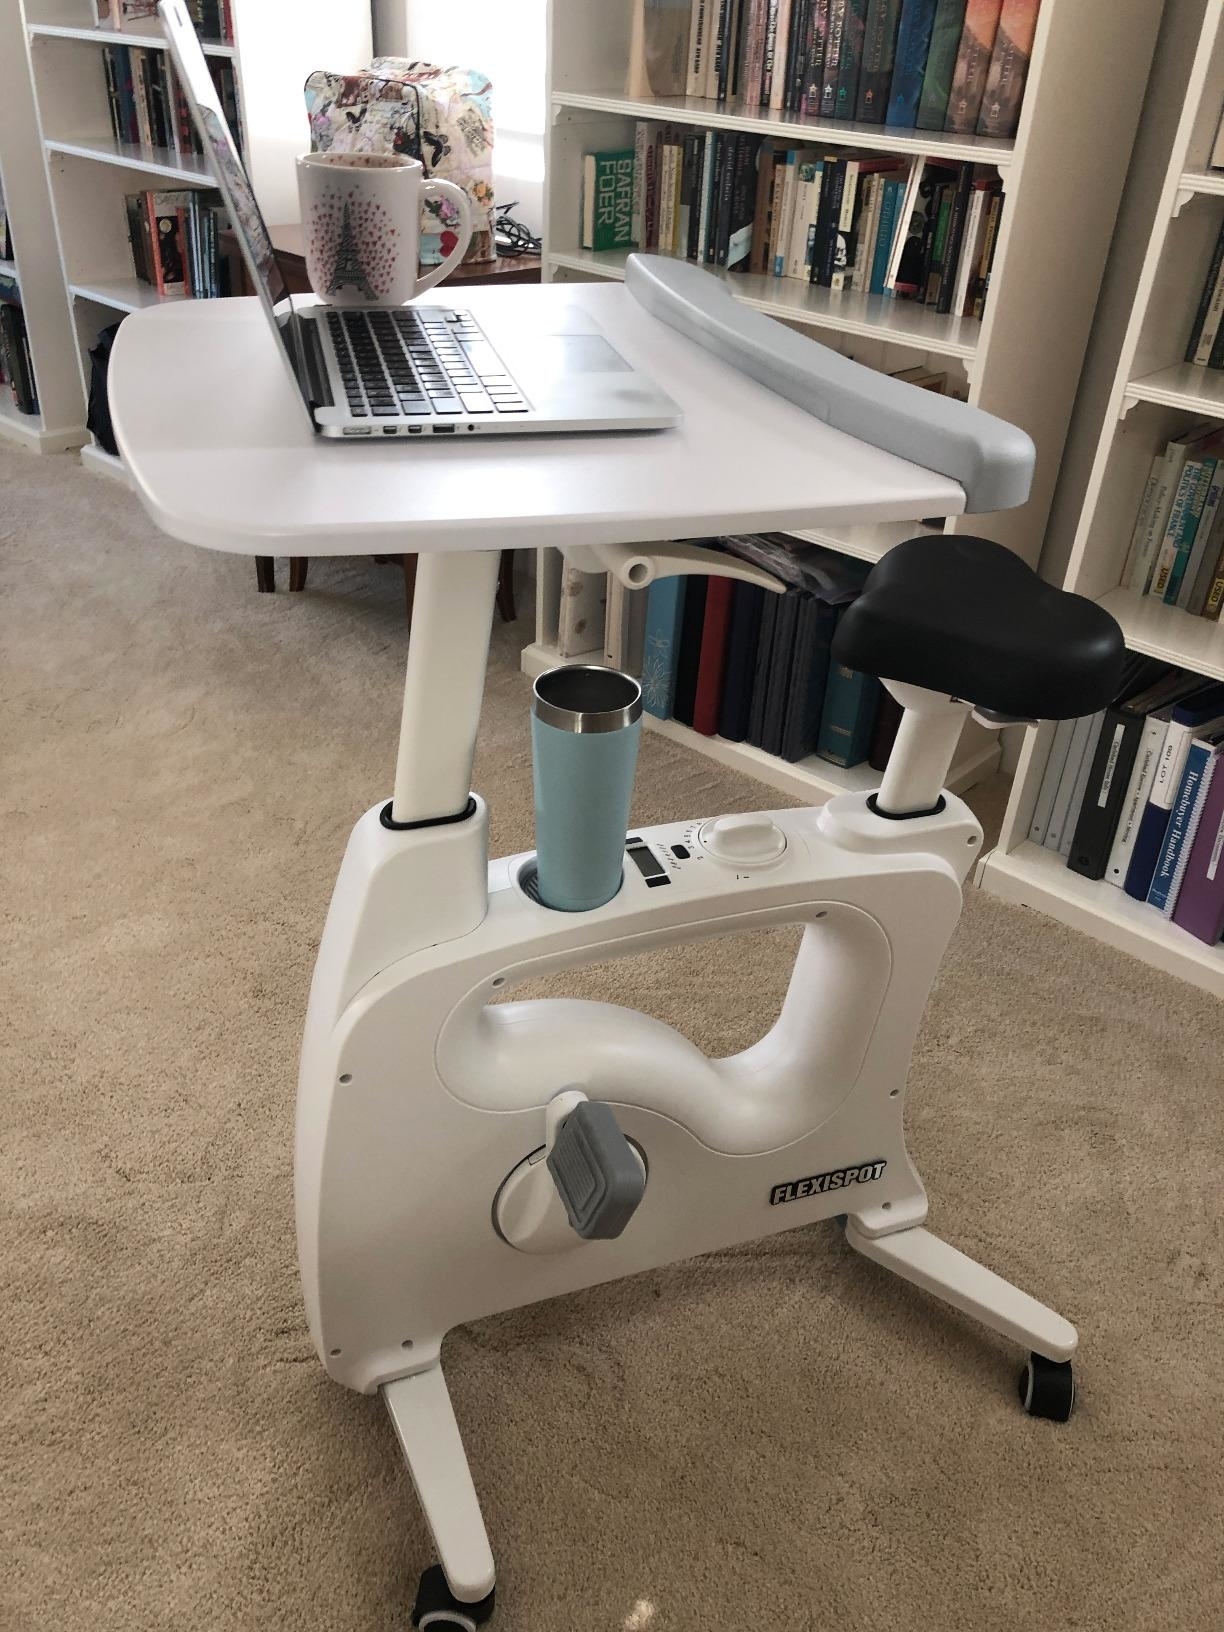 Reviewer image of white bike desk in a home with laptop propped on the tray and drink in the holder